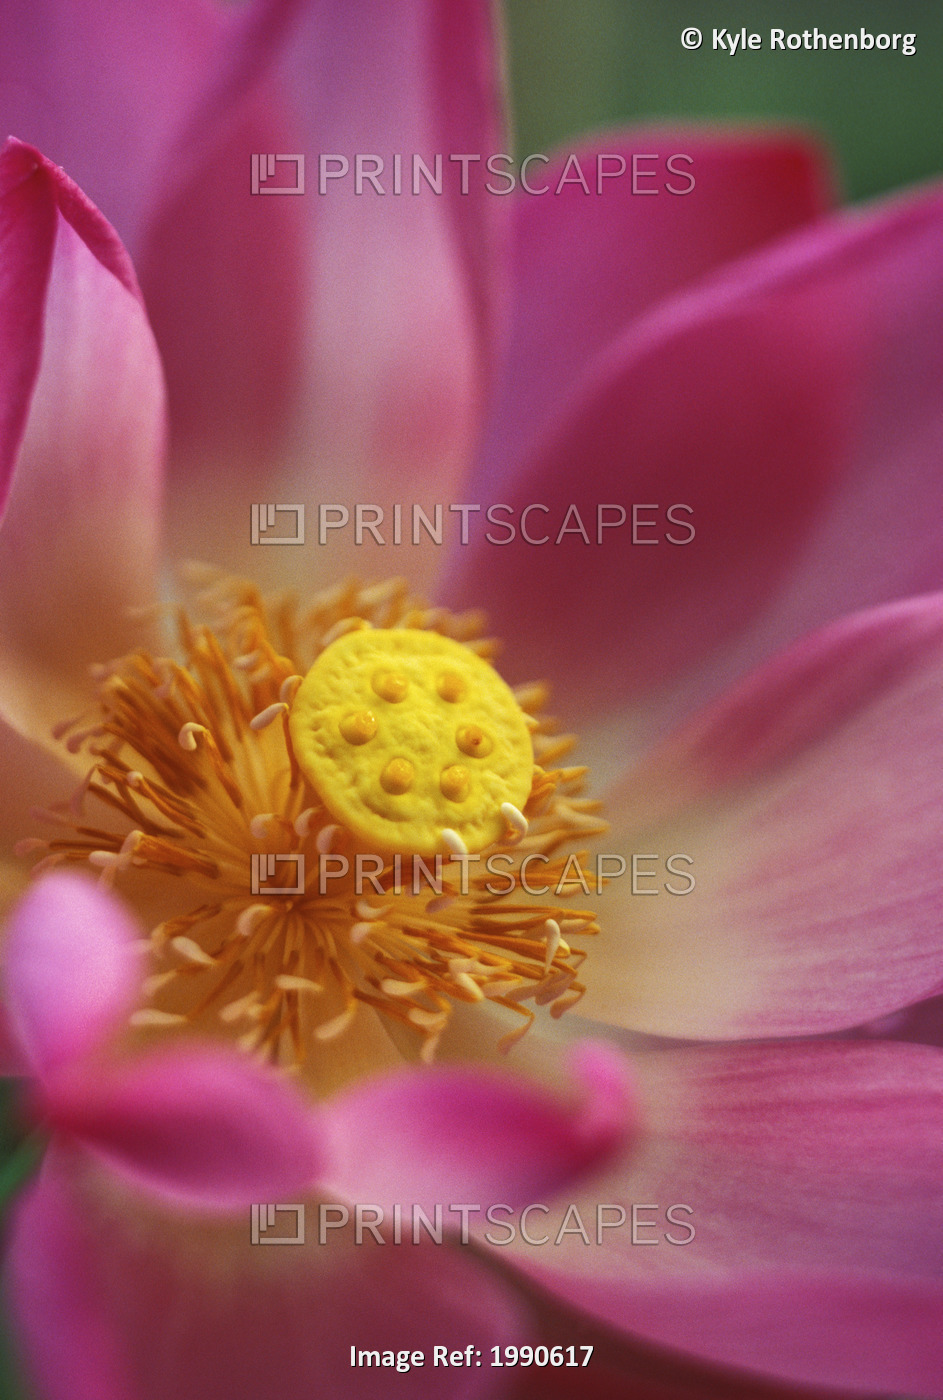 Extreme Close-Up Of Pink And White Lotus Blossom With Yellow Center